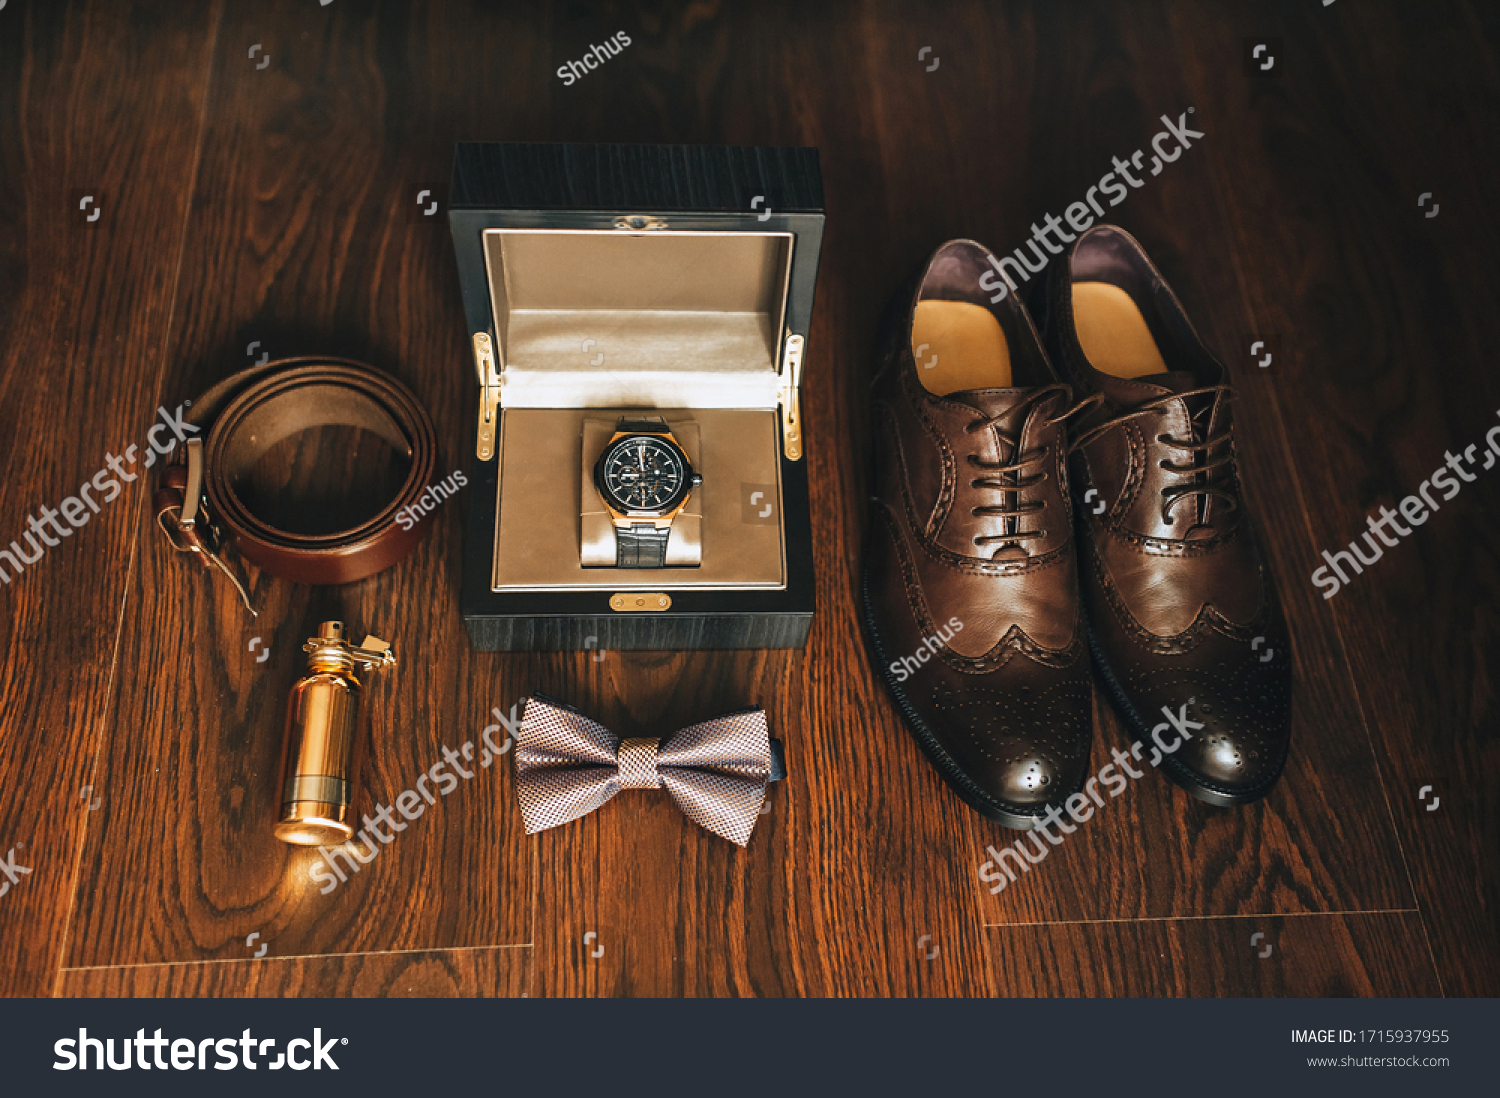 Gentleman's set of businessman and groom: shoes, perfume, belt, watch, bow-tie. Wedding details on a wooden background. Photography, concept. #1715937955